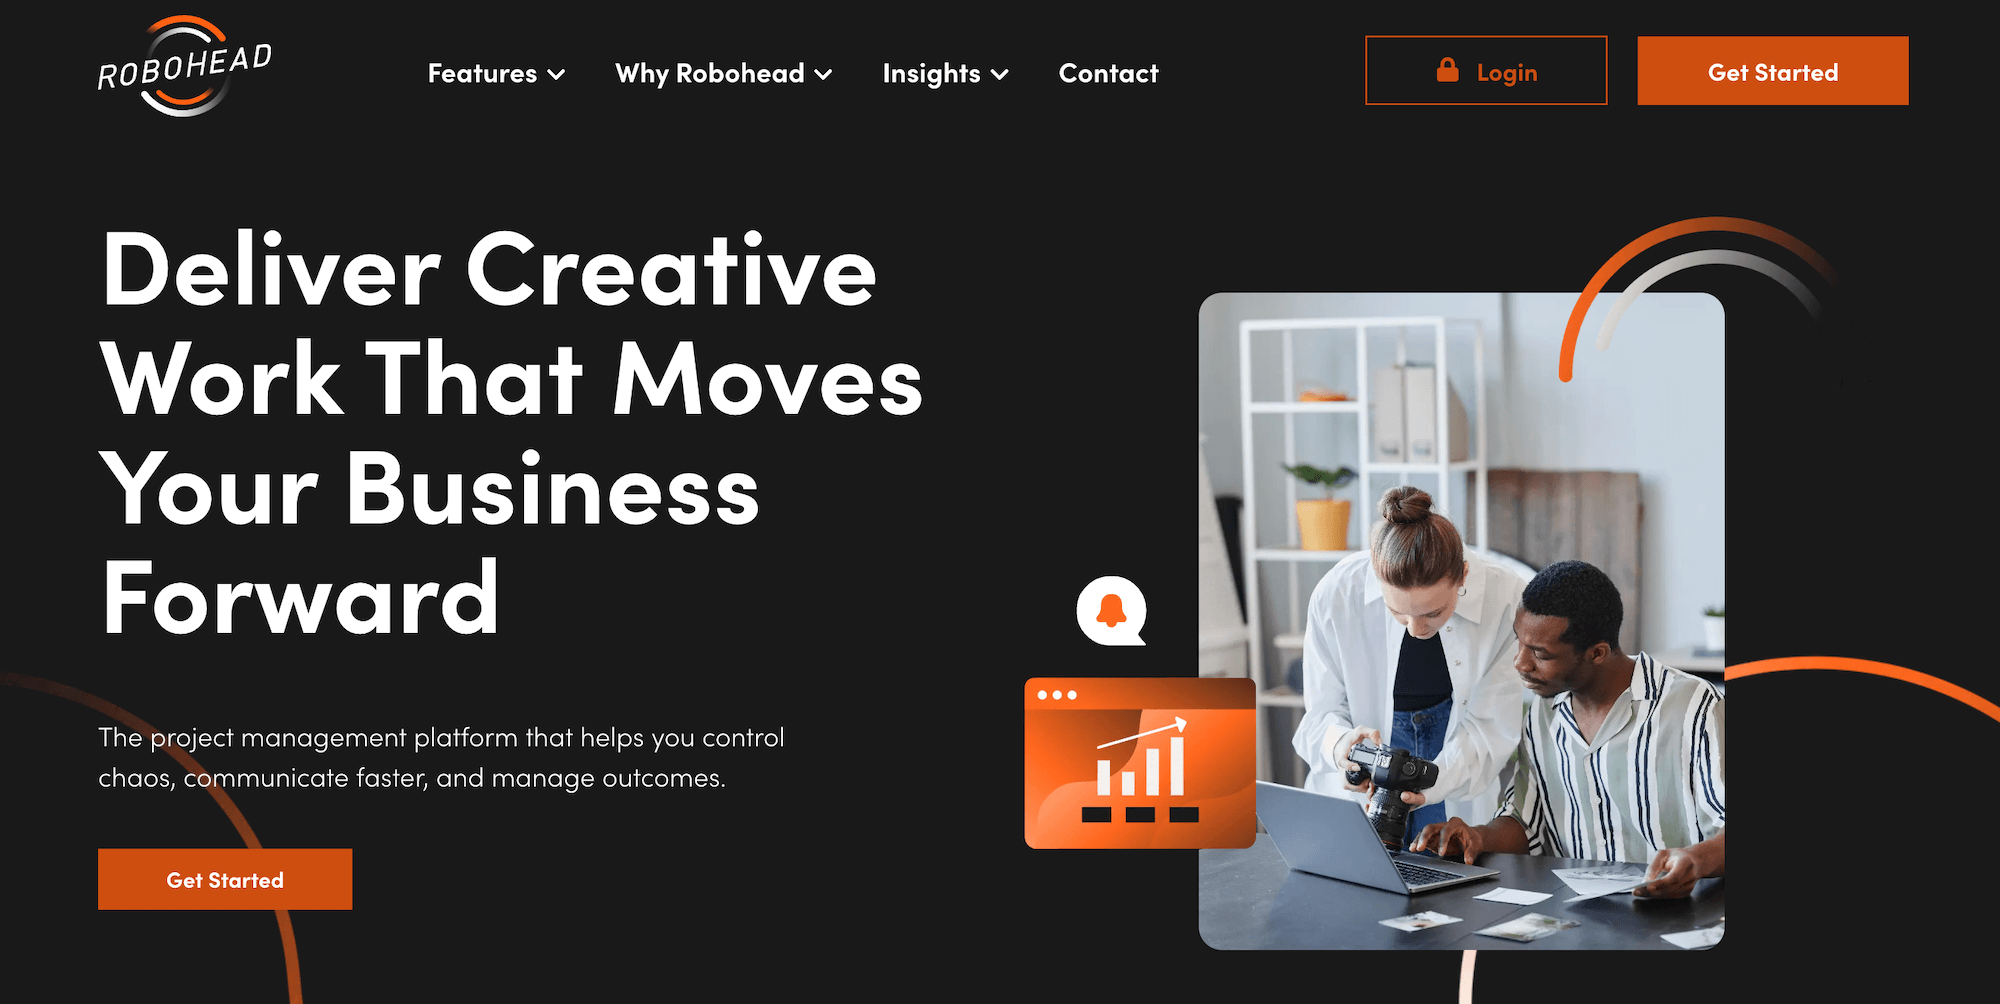 RoboHead homepage: Deliver Creative Work That Moves Your Business Forward